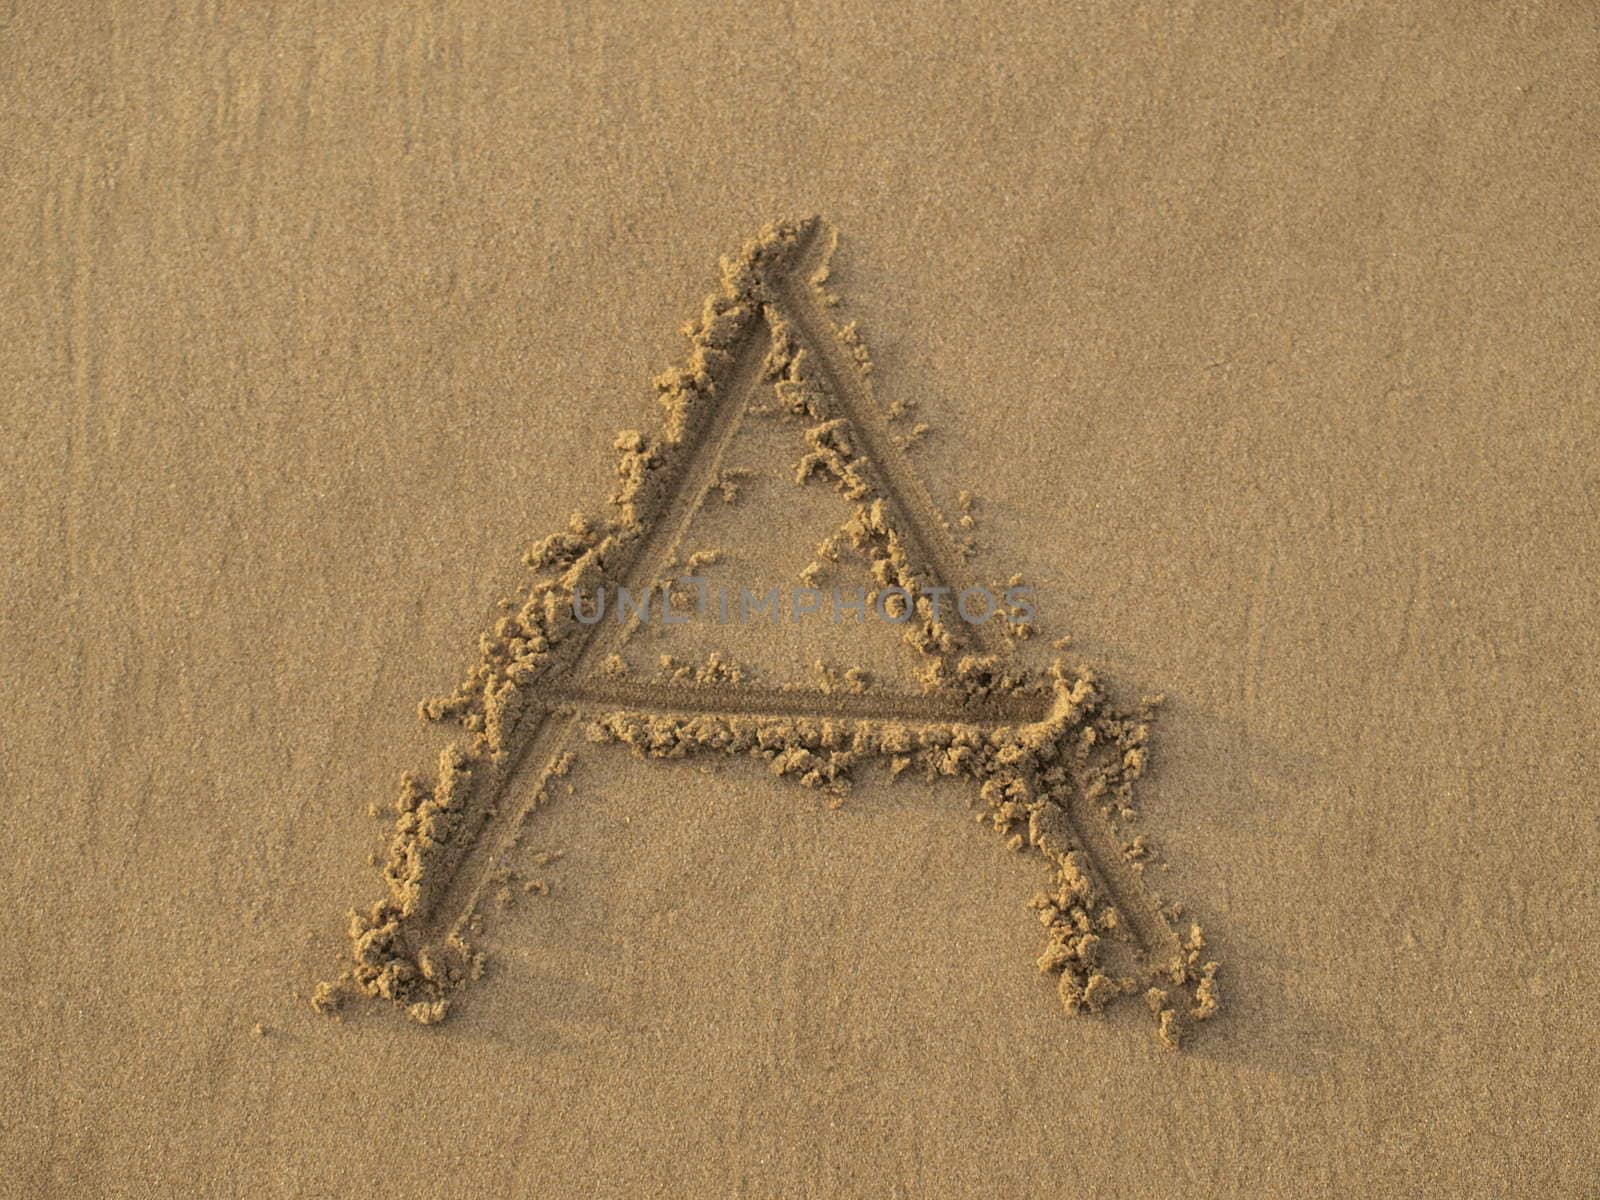 Alphabet starts with letter A hand written on the beach